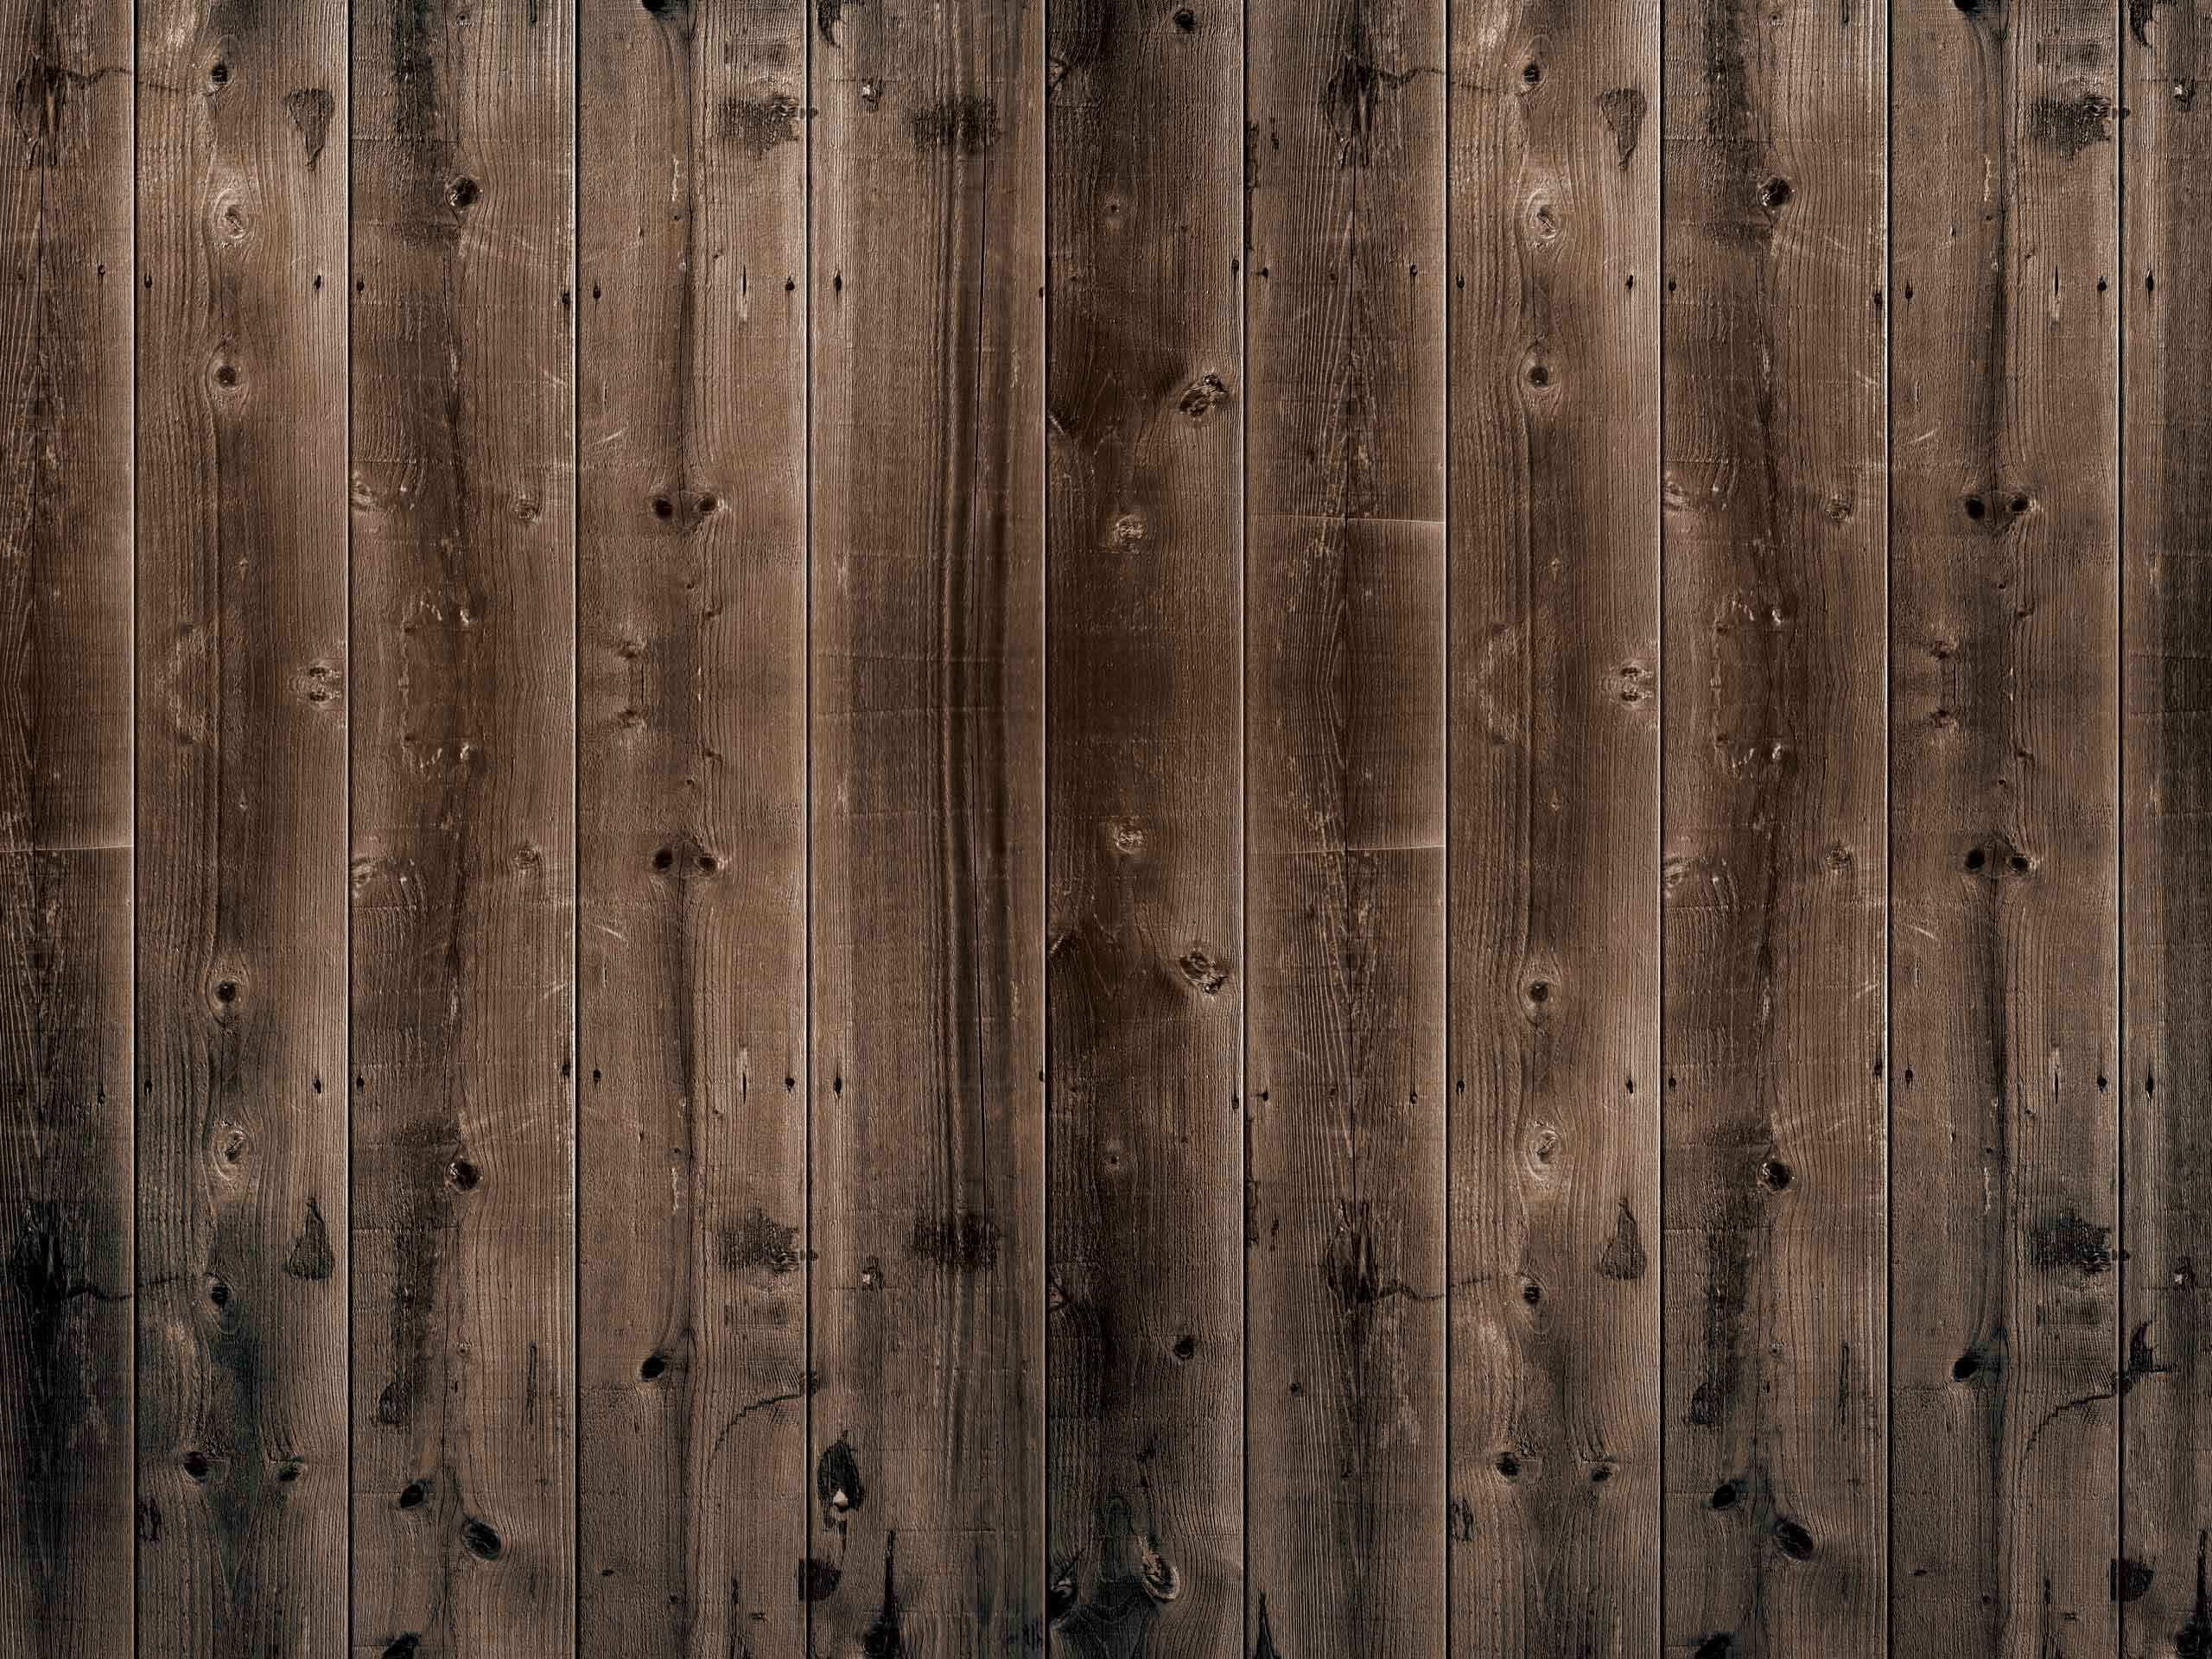 Barn Wood Background For Inspiration Ideas Barn Wood Background ...